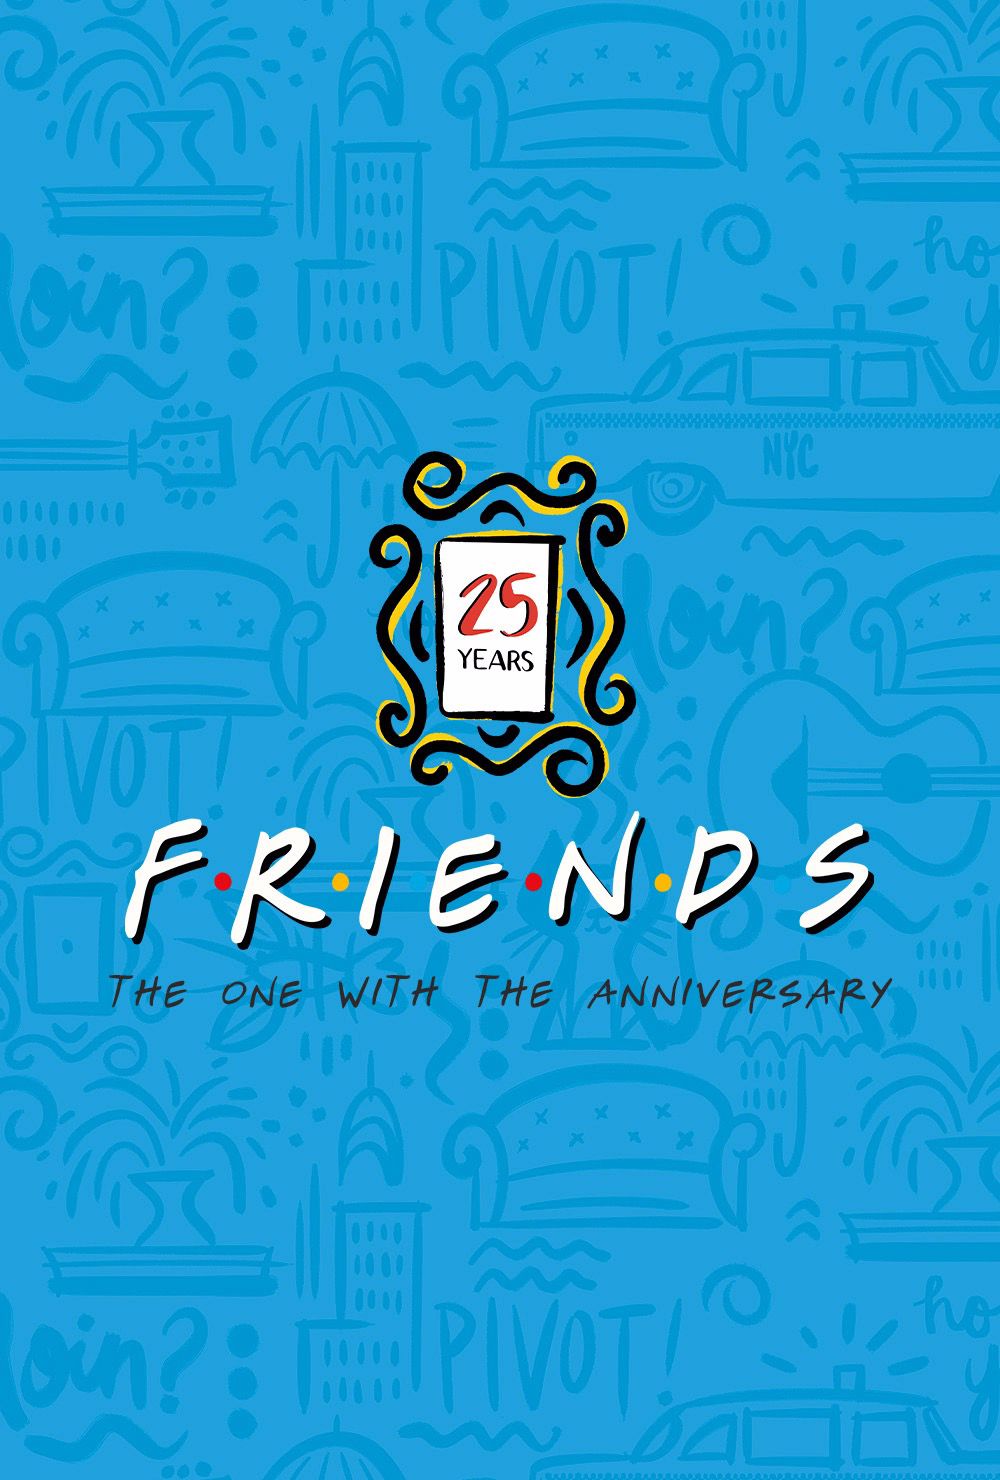 Friends 25th Anniversary poster